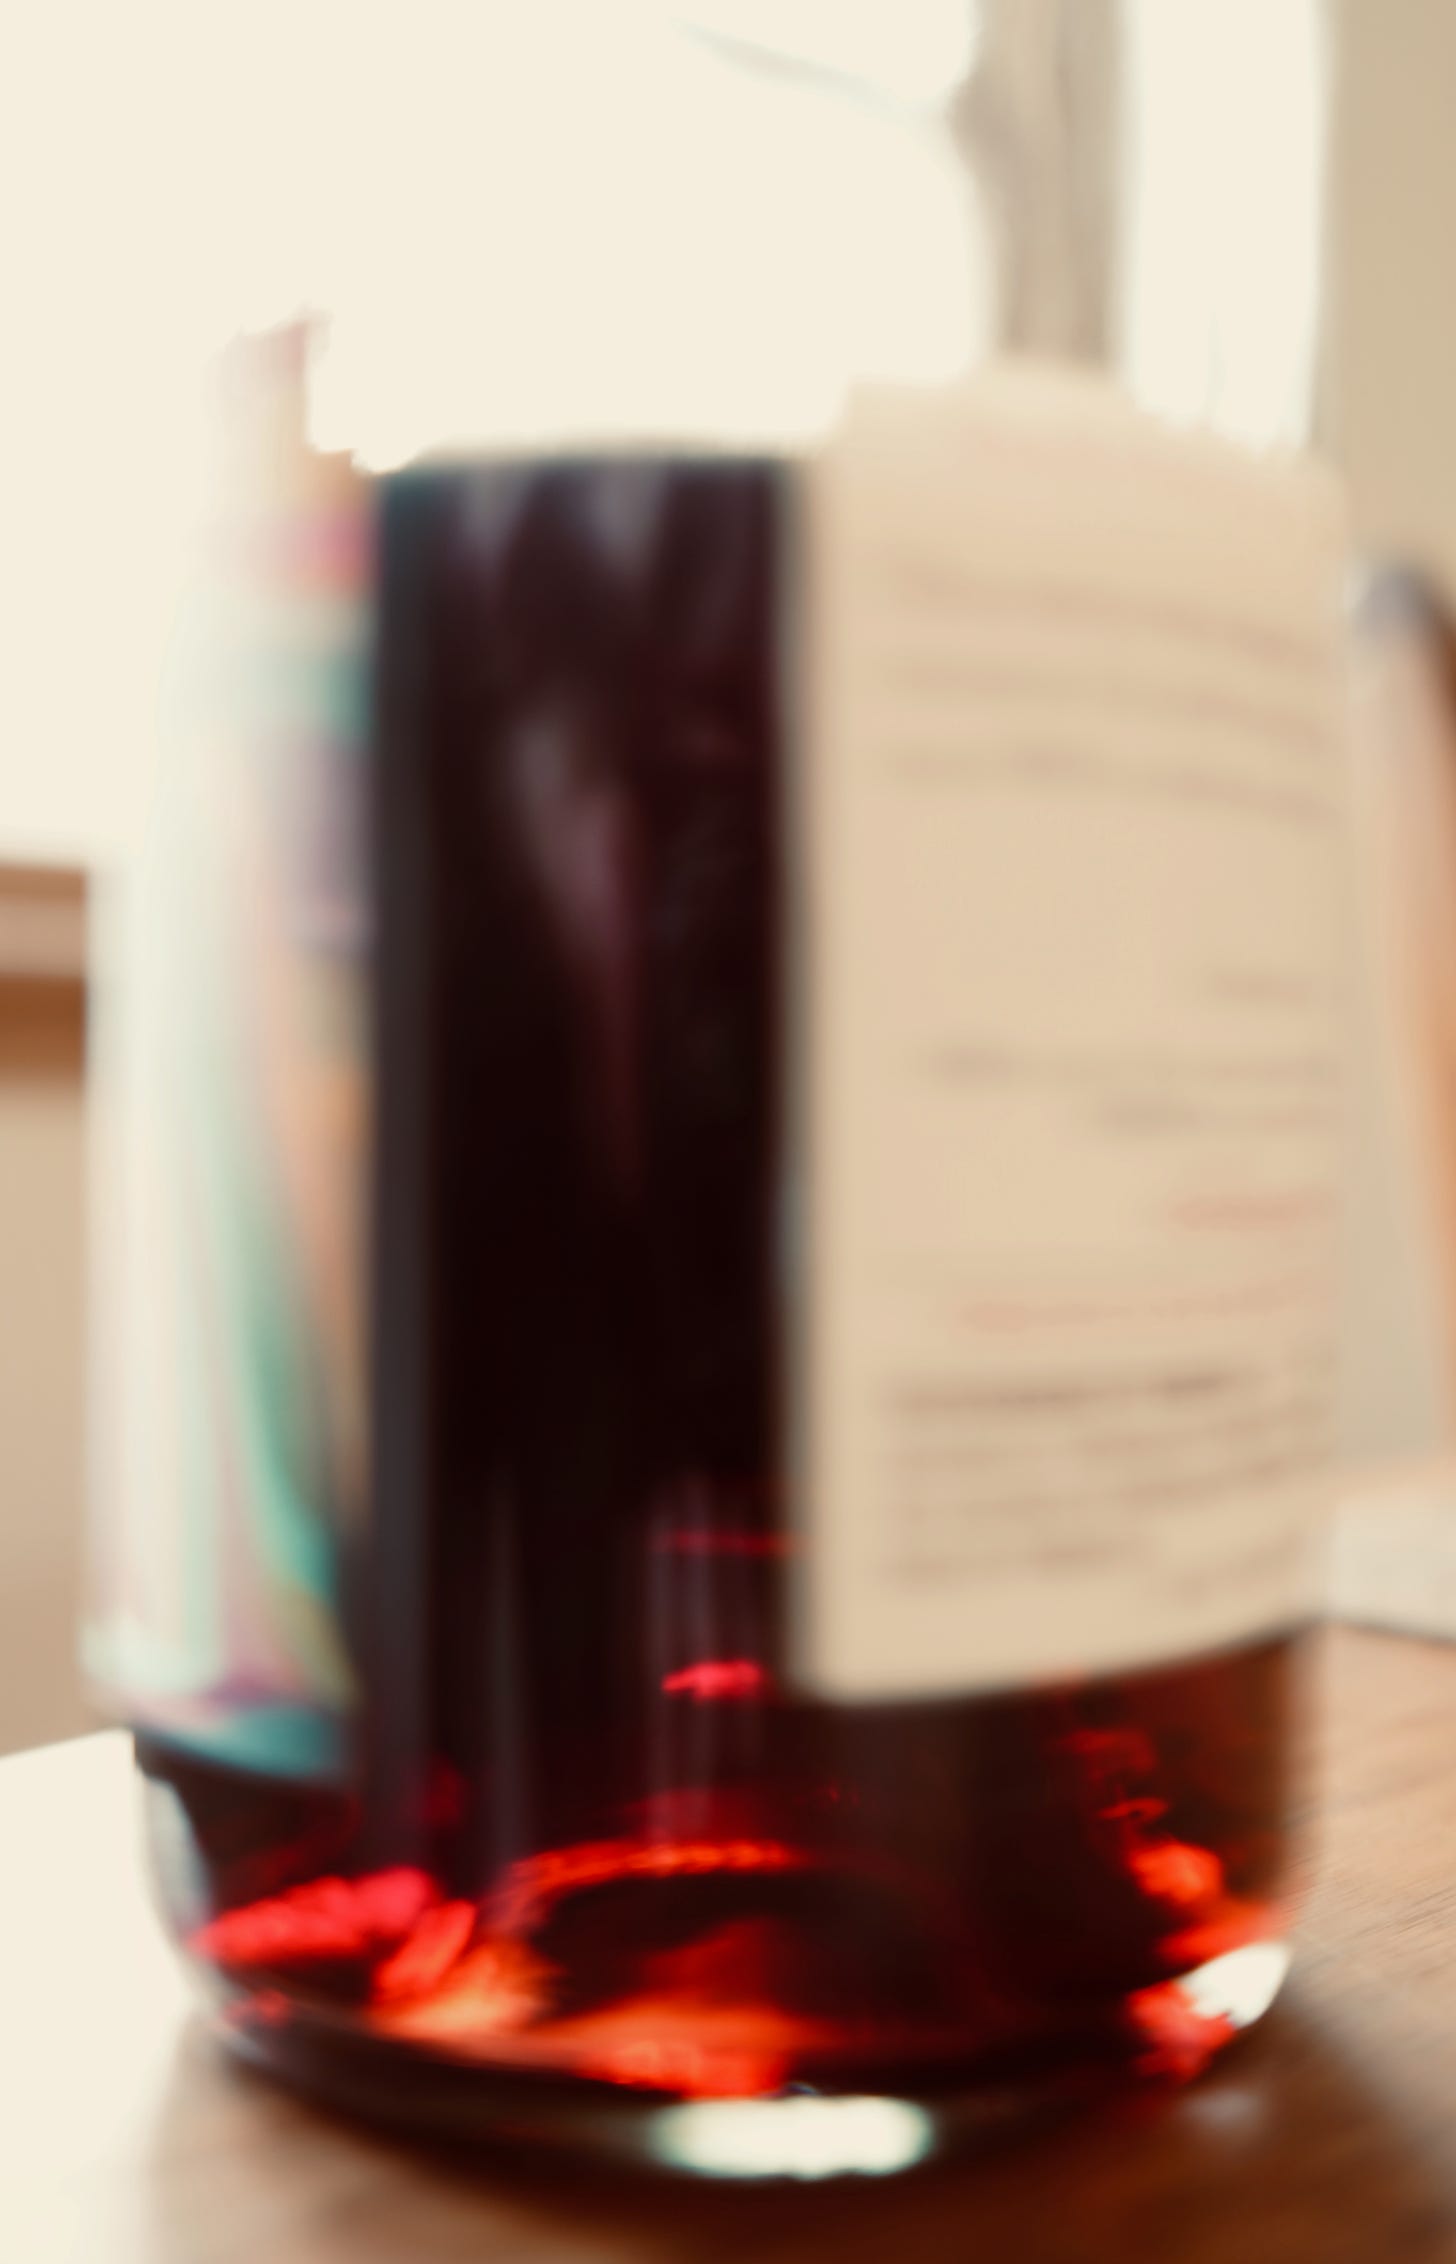 Blurry and overexposed photo of a half empty bottle of wine